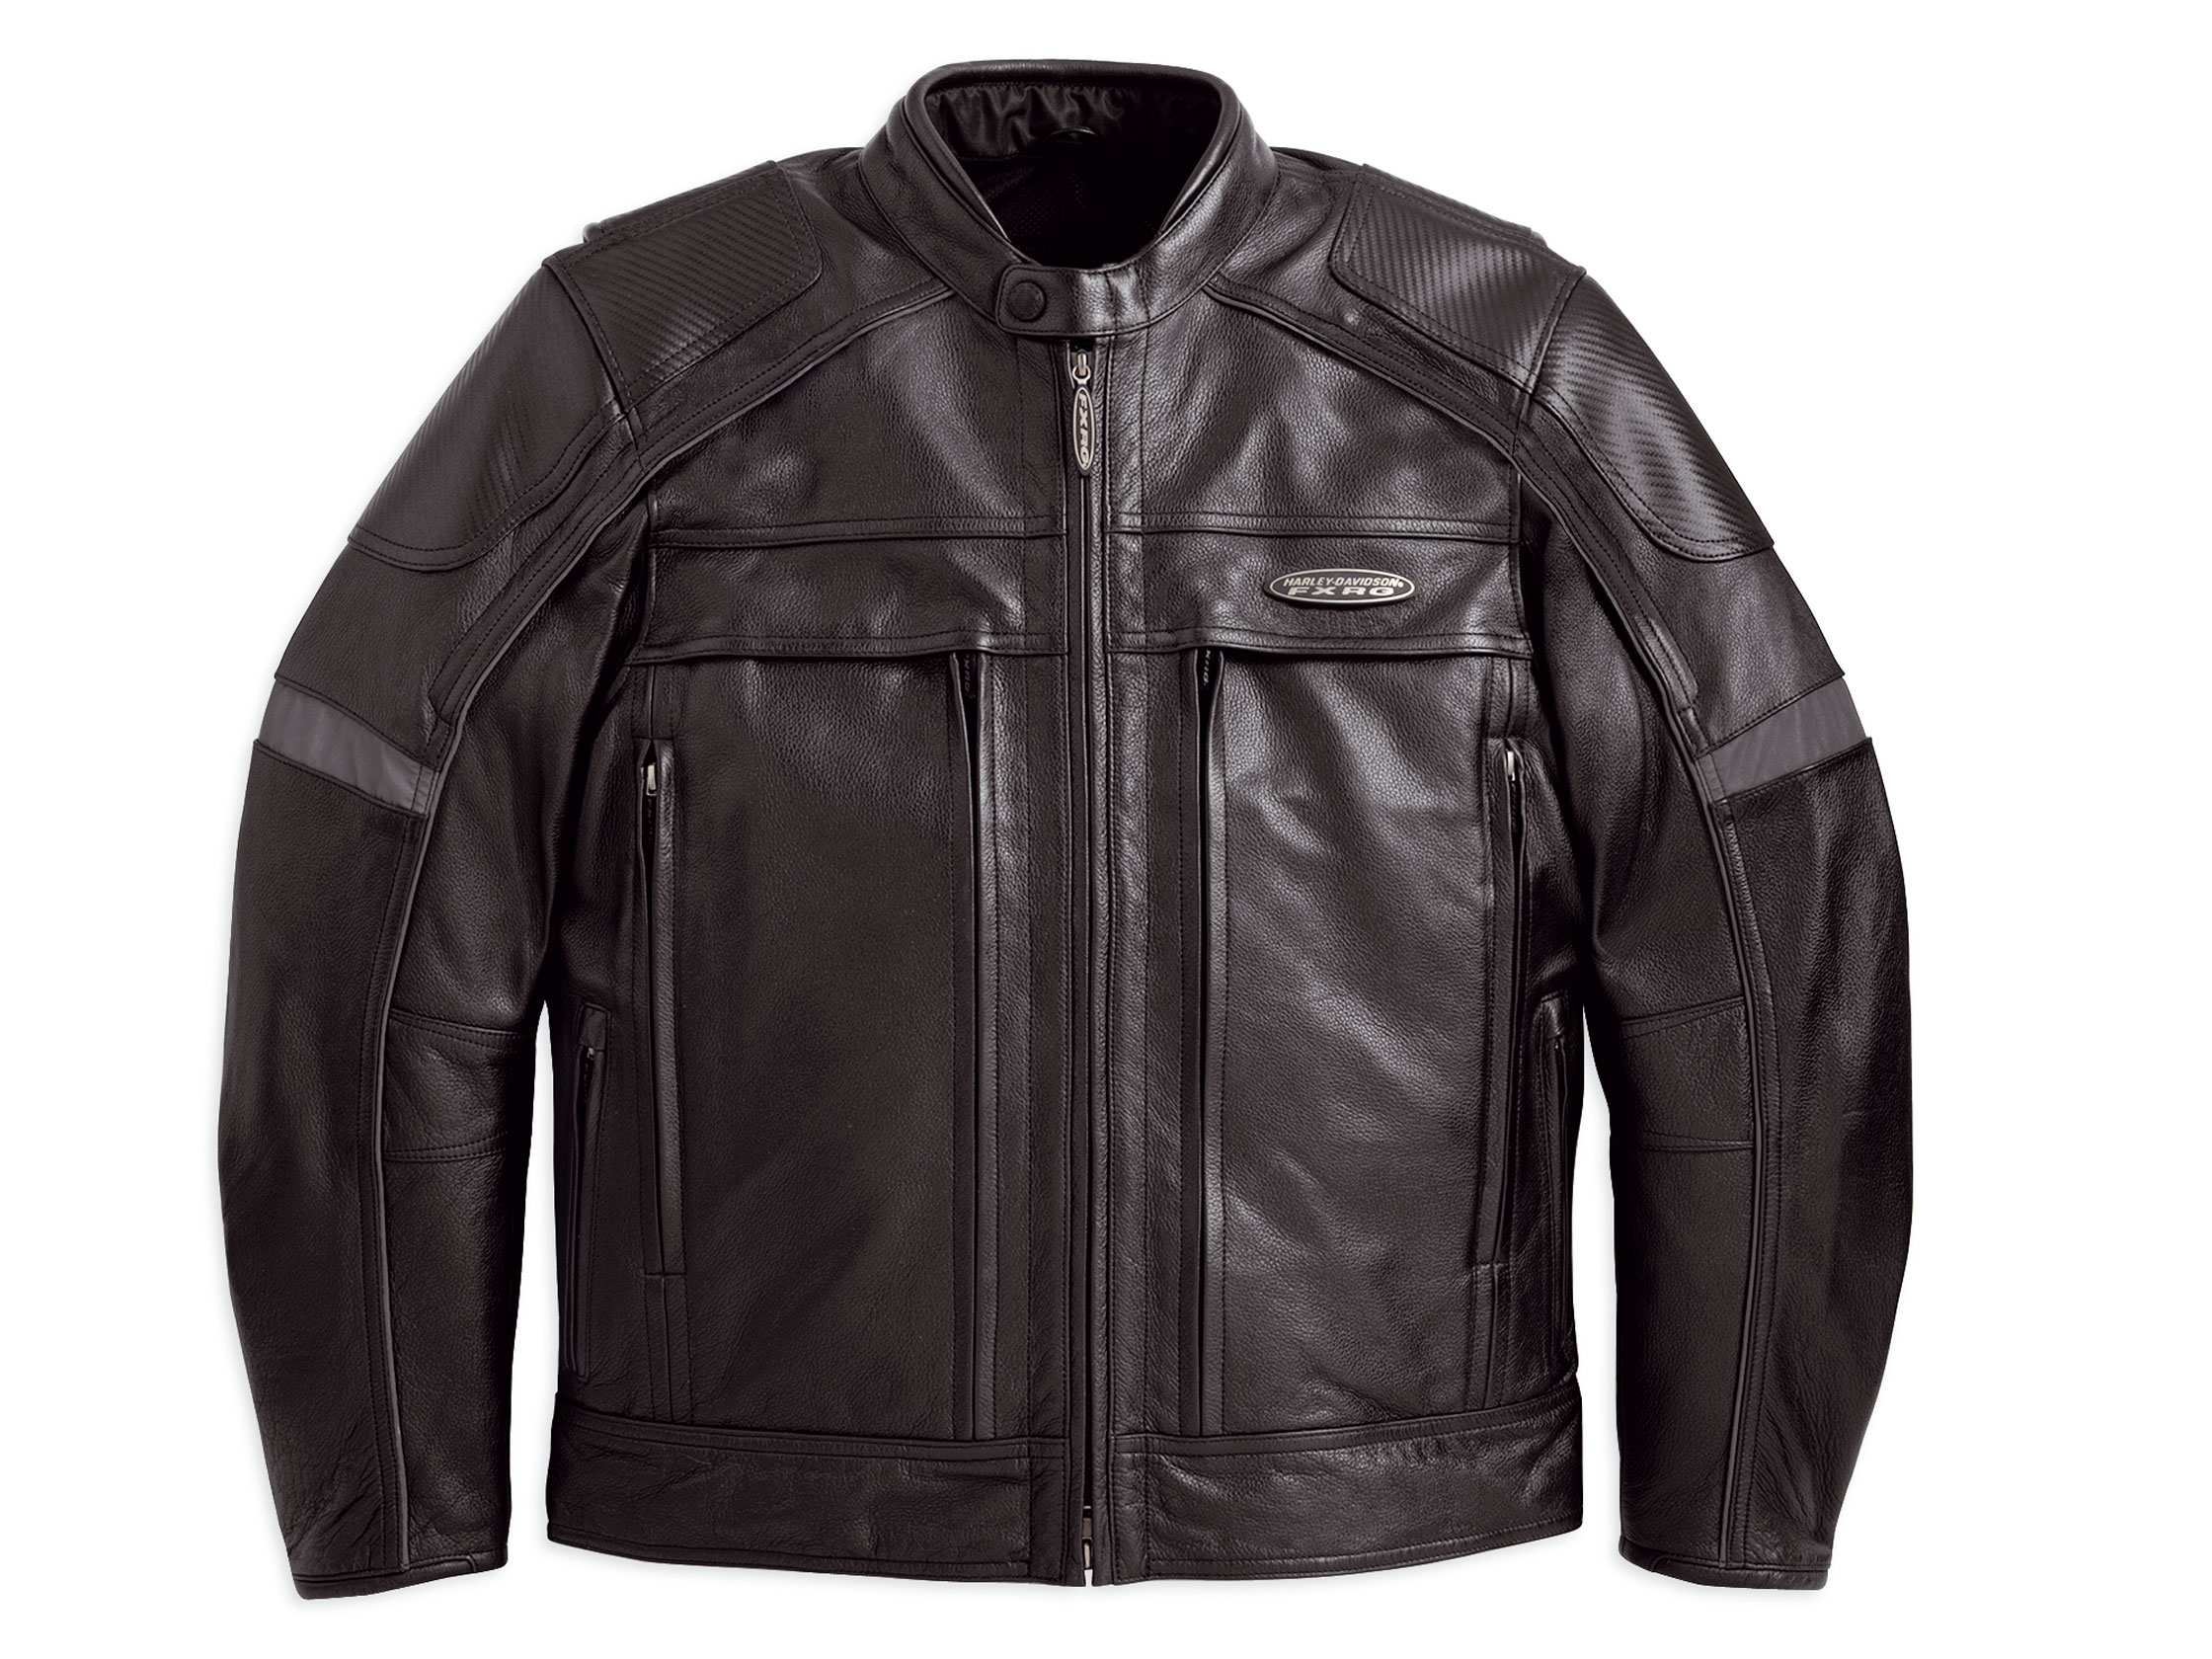 Men's FXRG Gratify Leather Jacket with Coolcore Technology